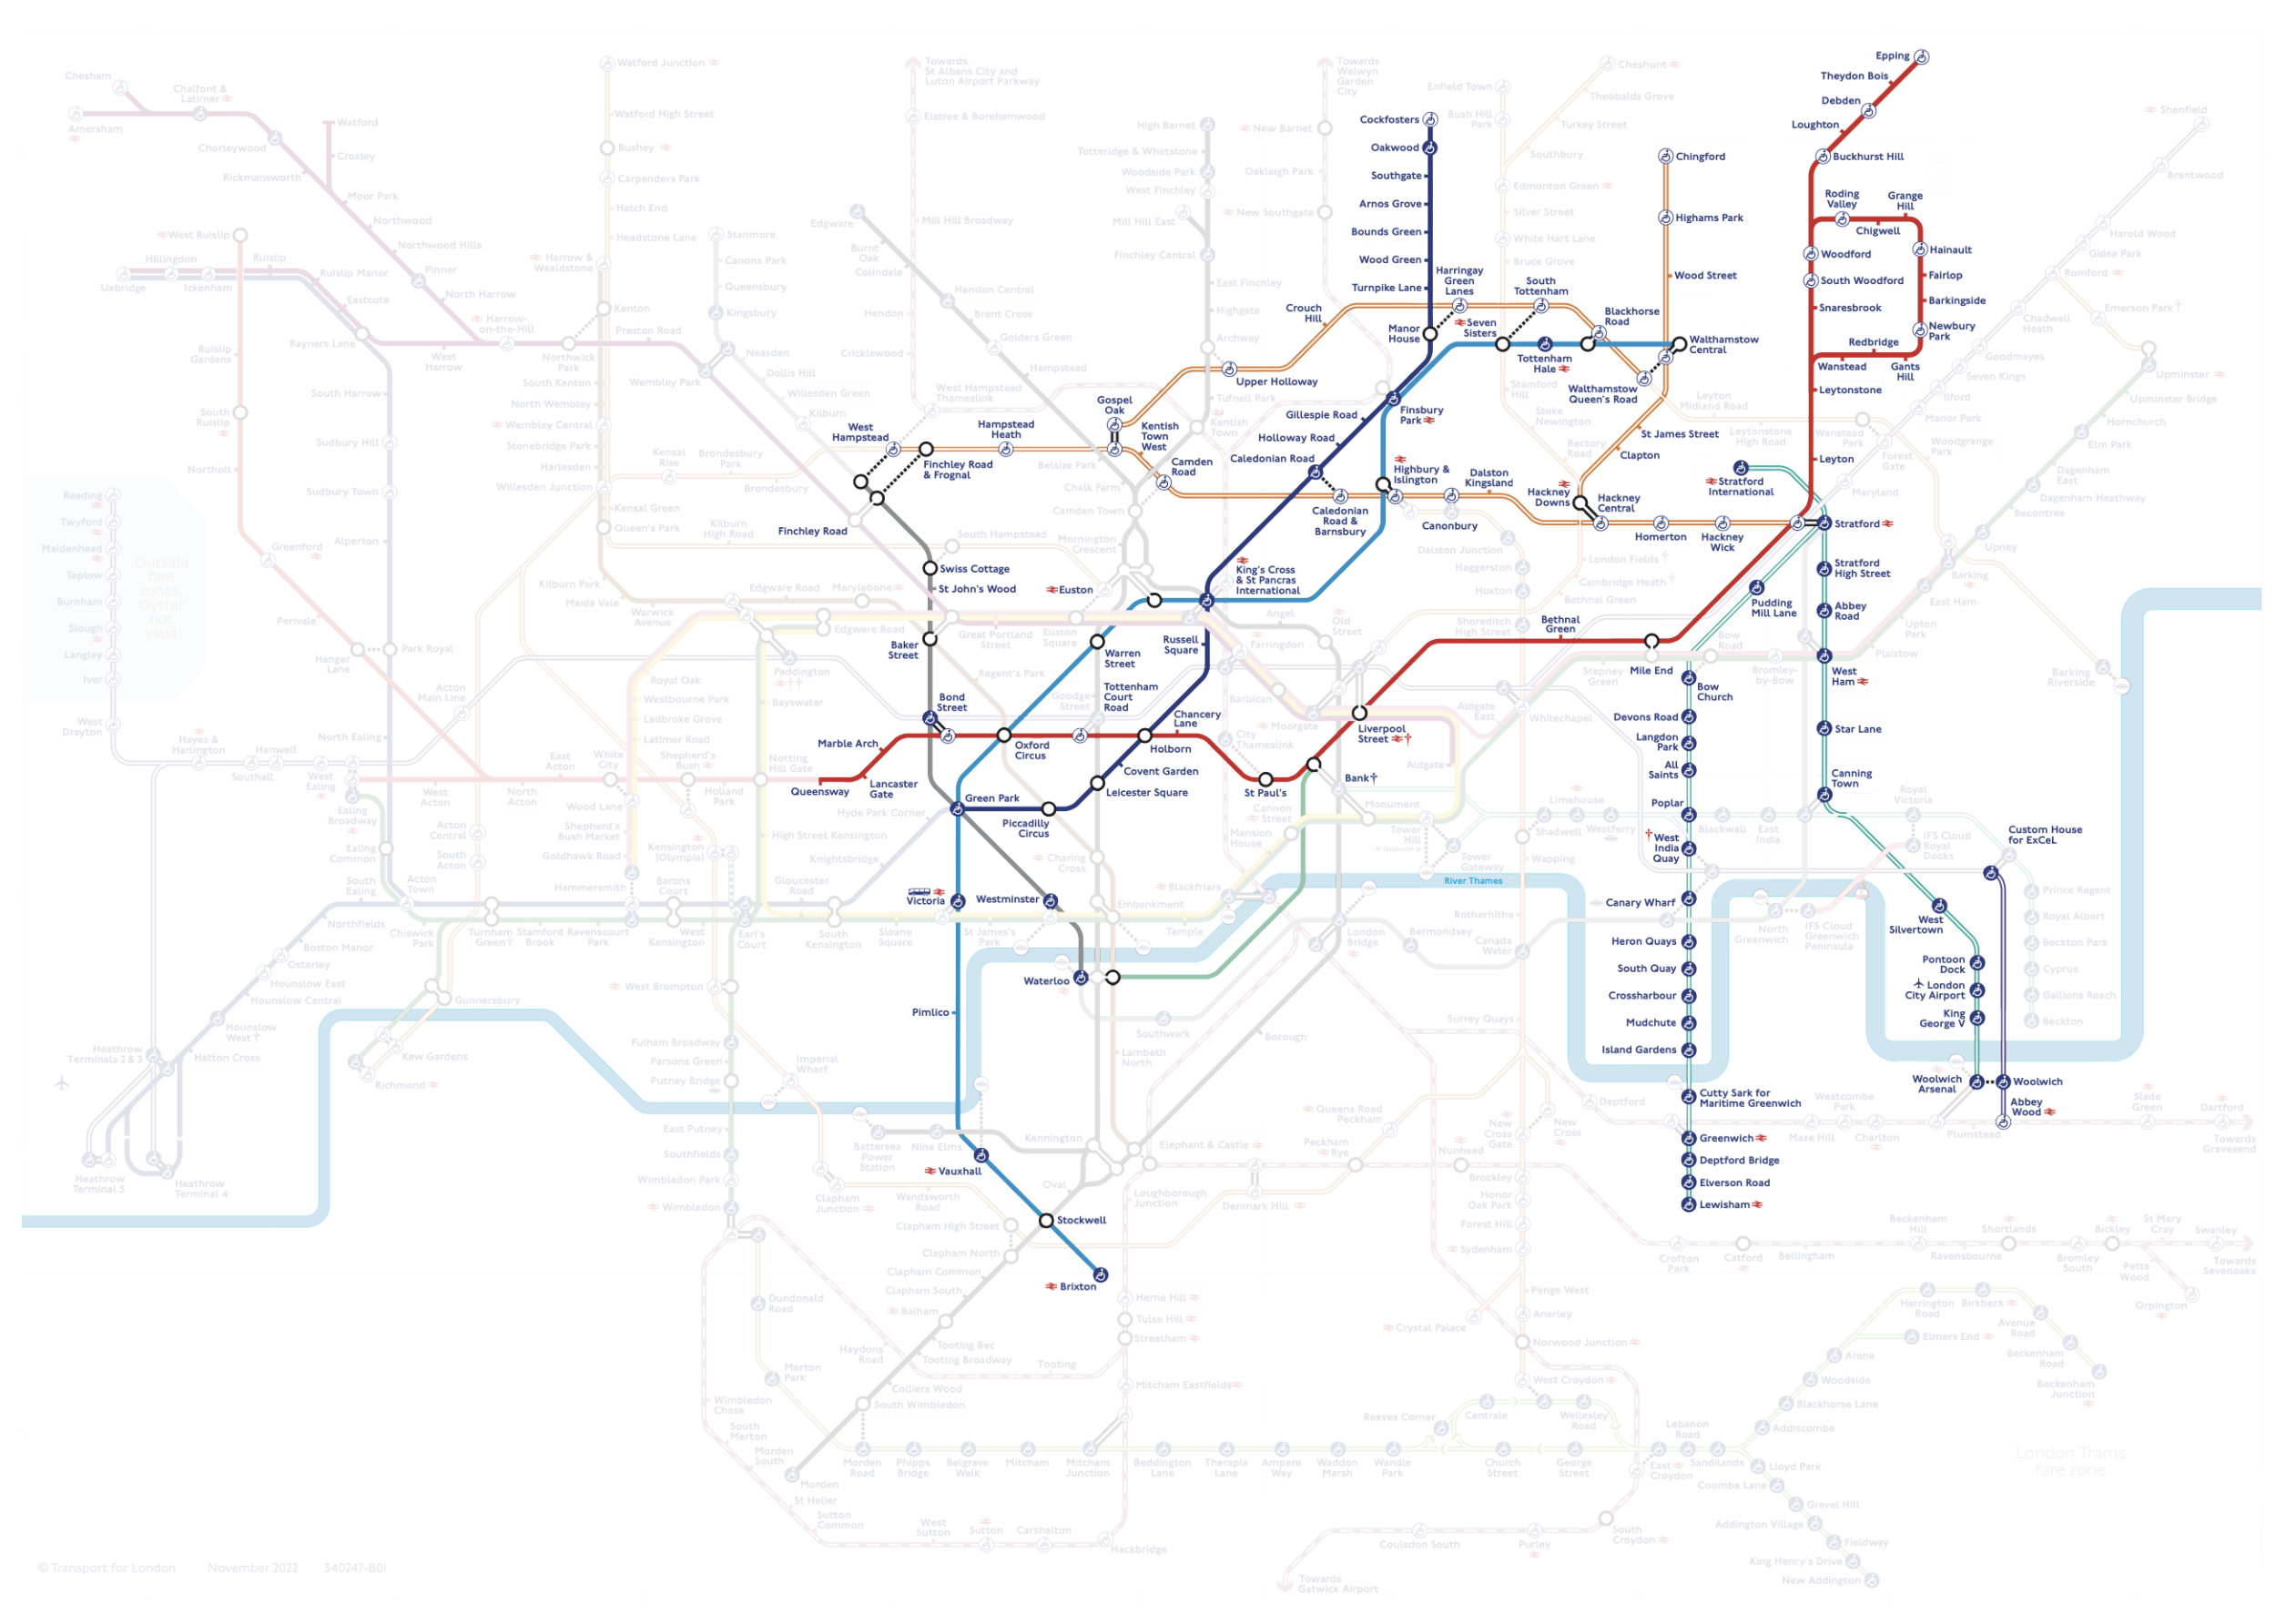 A map of the Transport for London network showing the parts that I have walked. 